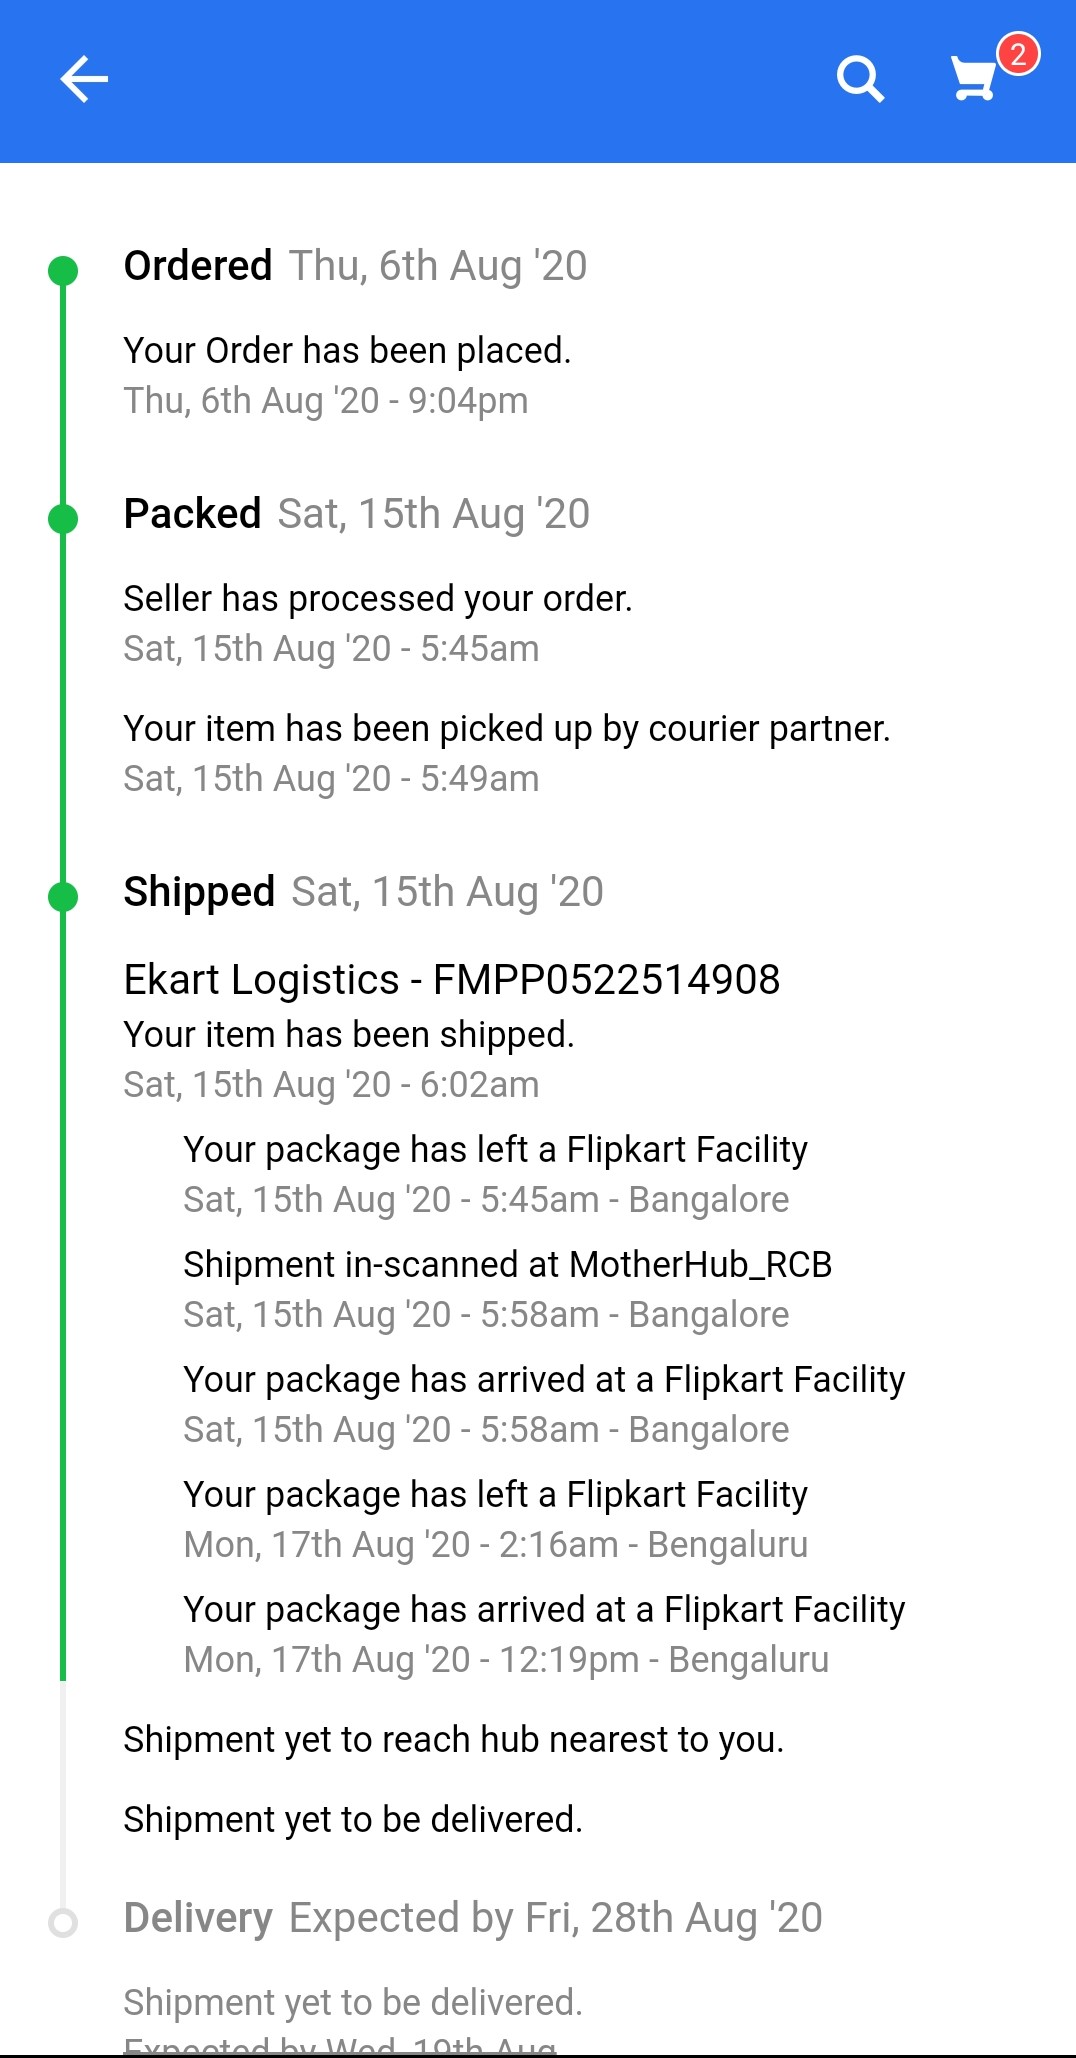 Failed product delivery and ineffective customer support